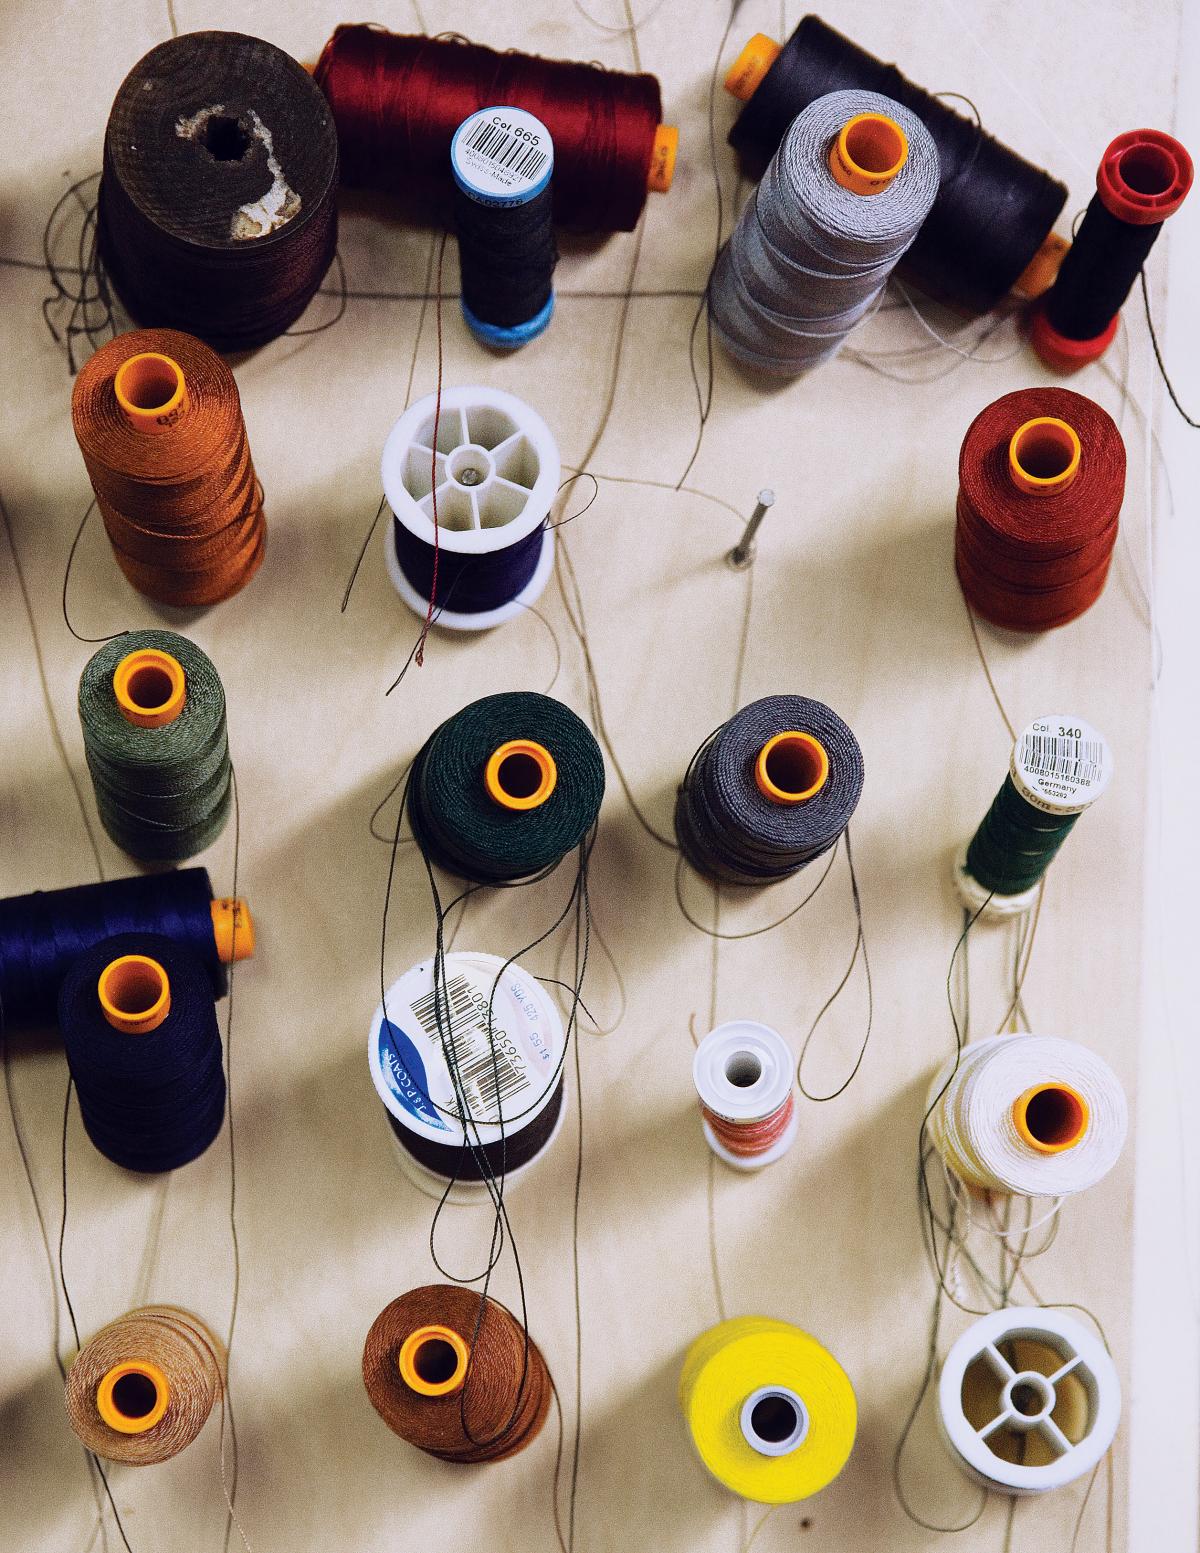 Multiple spools of multi-colored thread are arranged on a white wood table